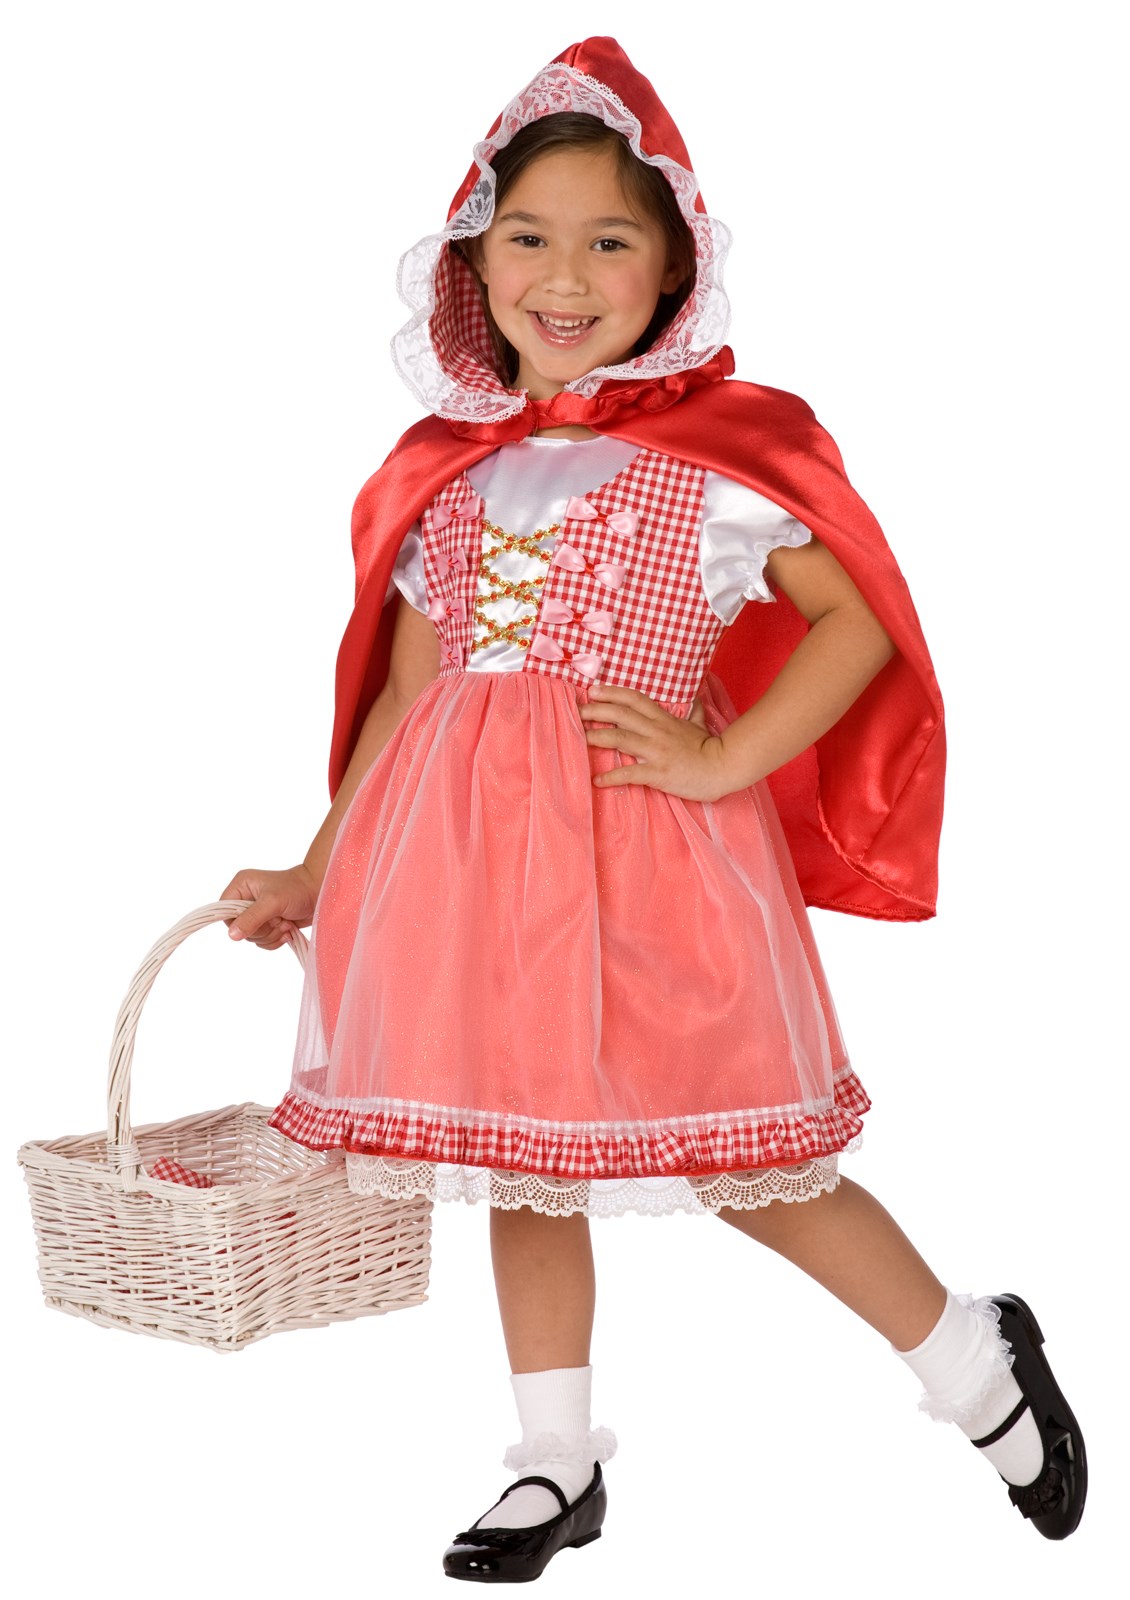 Red Riding Hood Costume for Toddlers